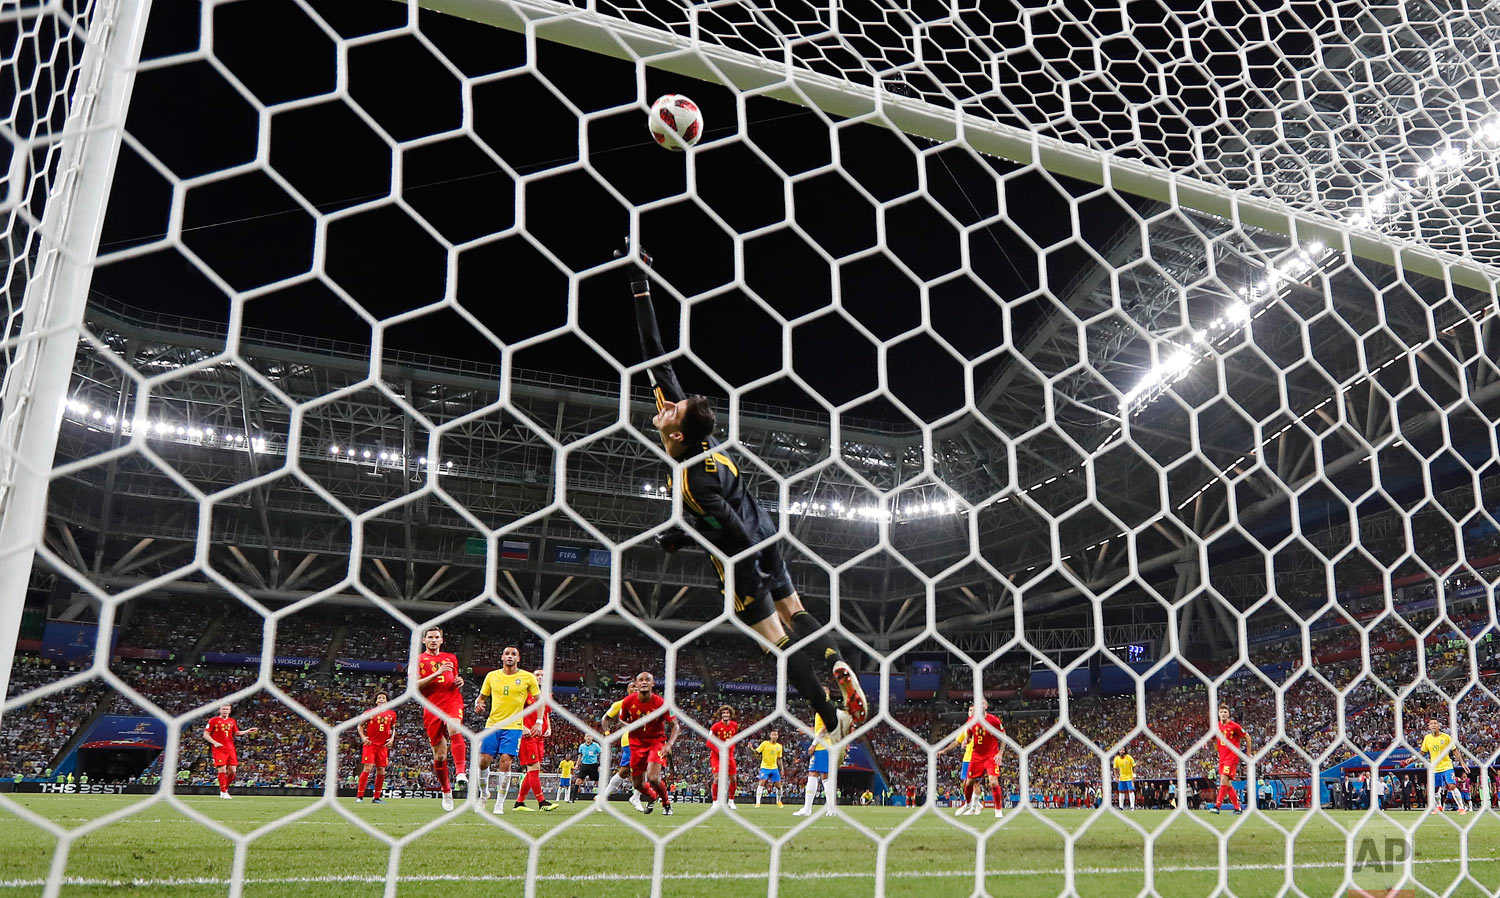  Belgium goalkeeper Thibaut Courtois saves from Brazil's Neymar during the quarterfinal match between Brazil and Belgium at the 2018 soccer World Cup in the Kazan Arena, in Kazan, Russia, Friday, July 6, 2018. (AP Photo/Frank Augstein) 